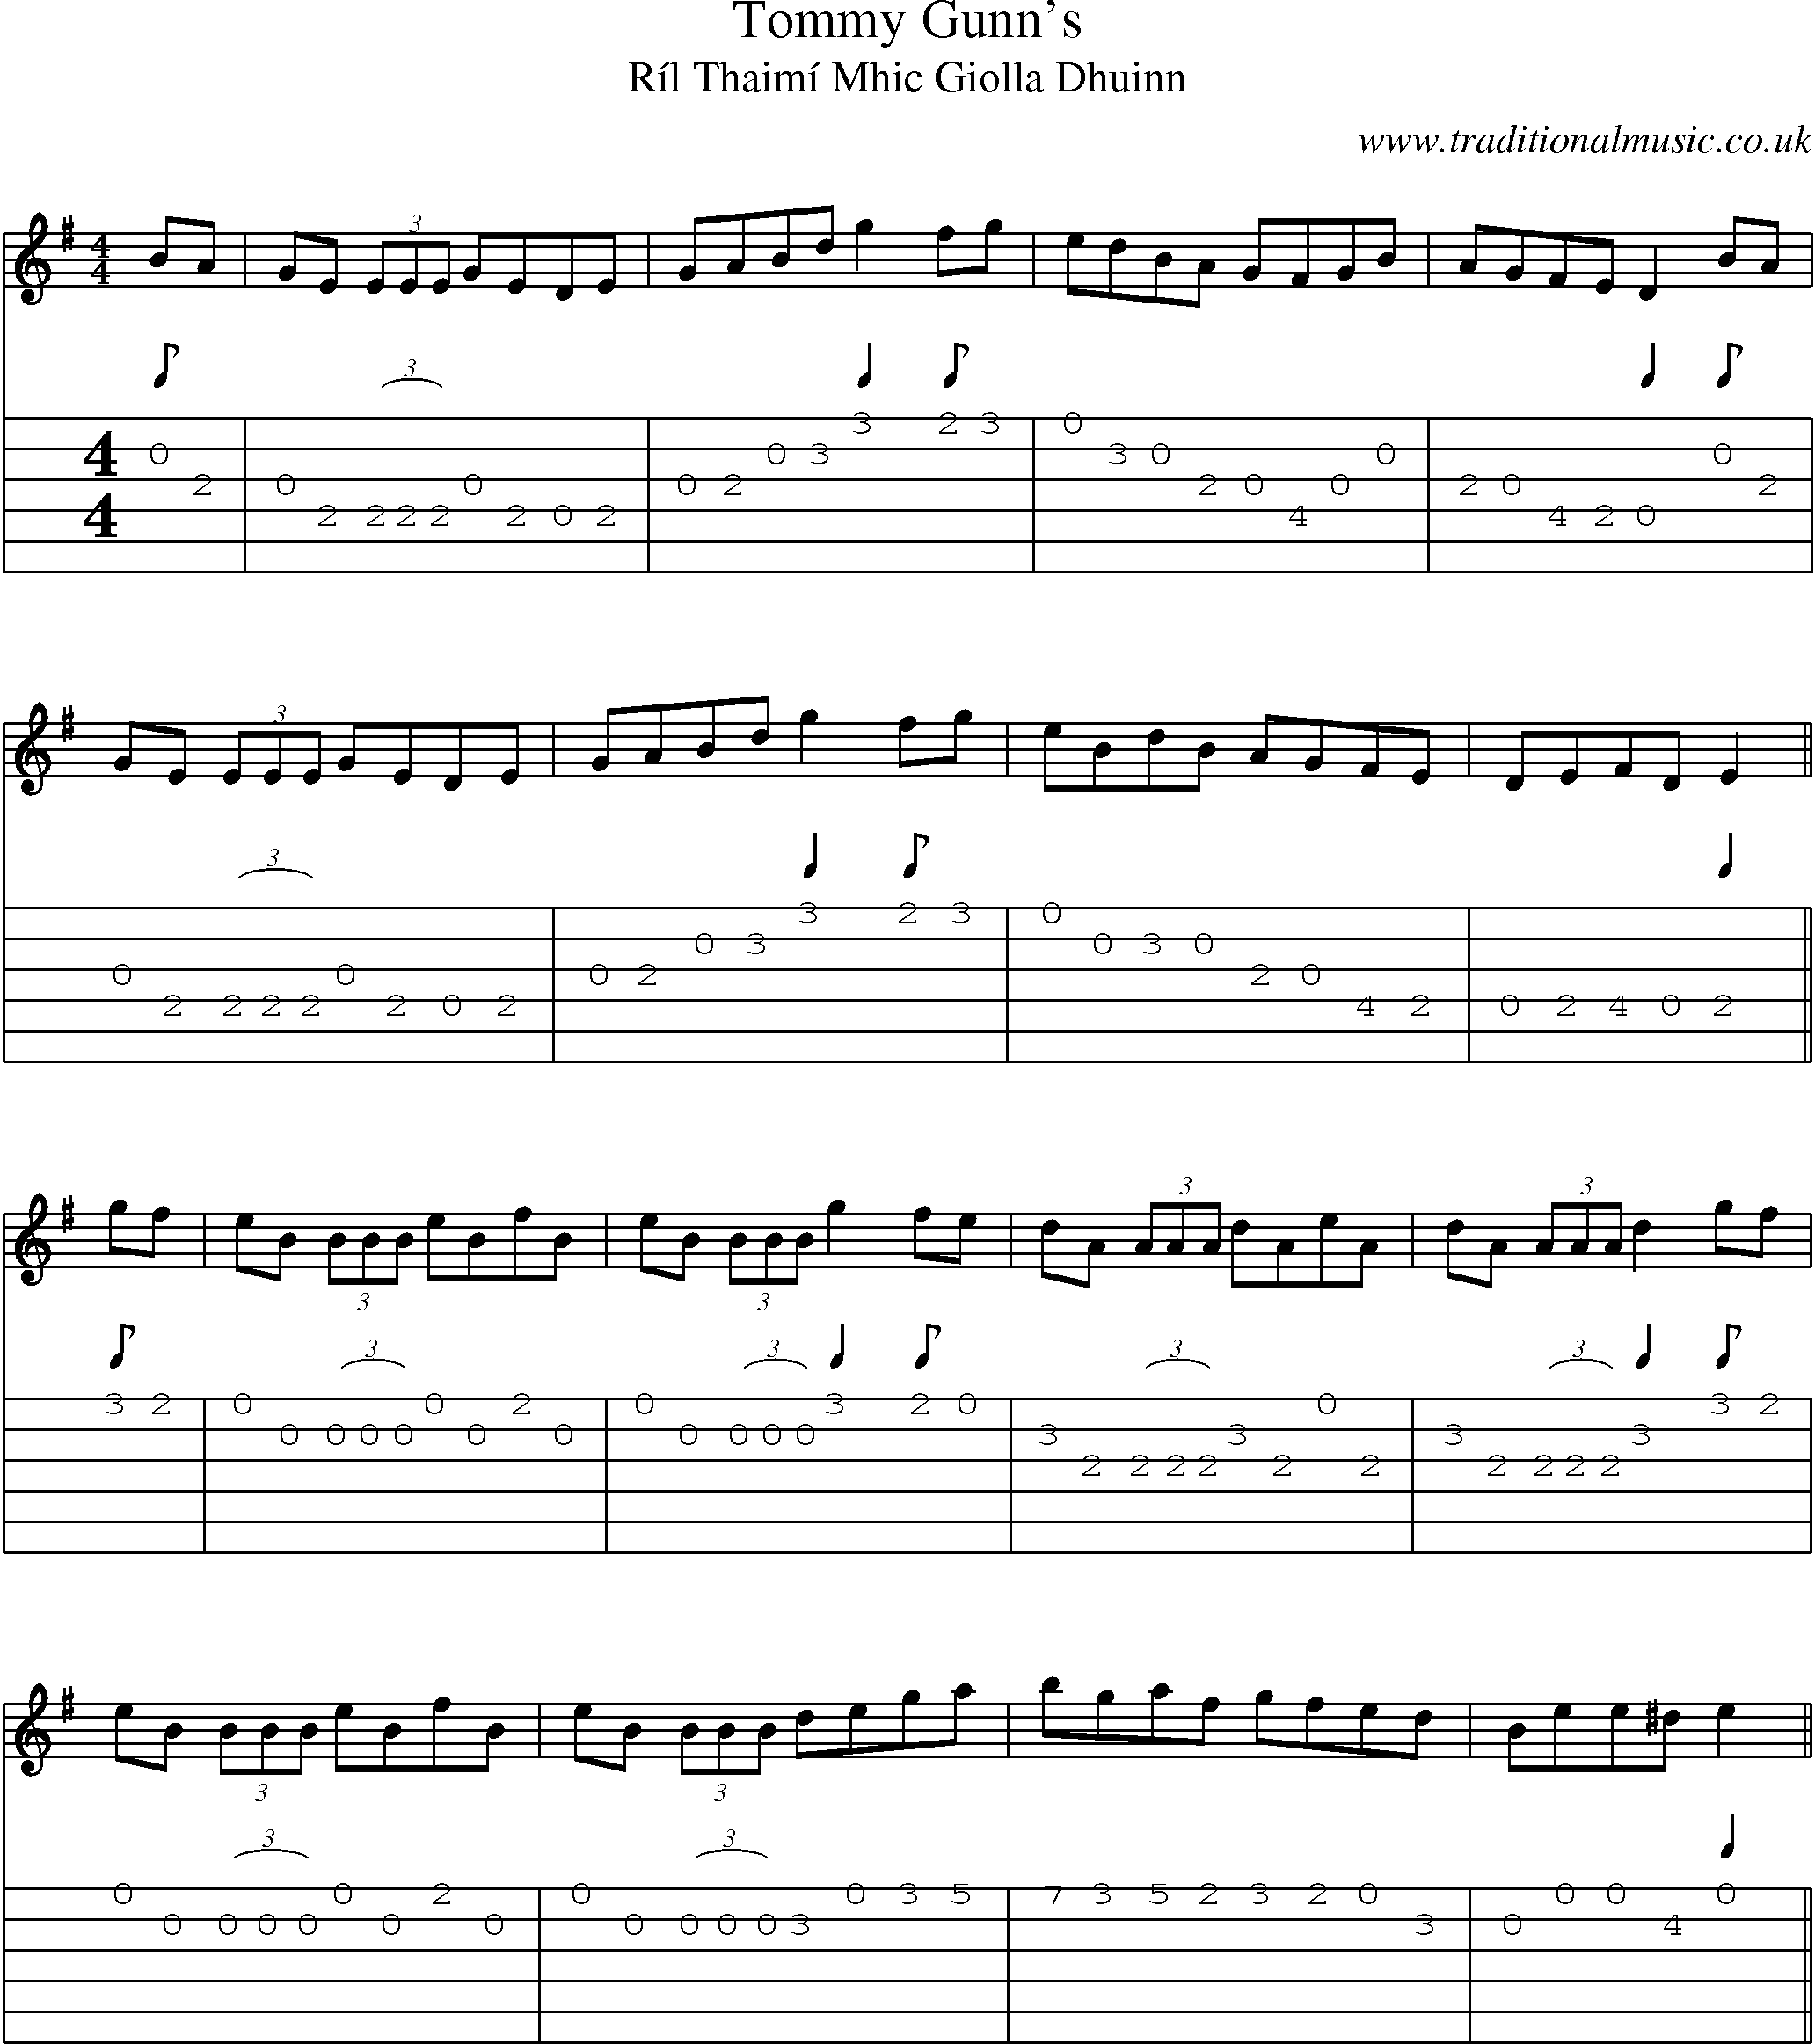 Music Score and Guitar Tabs for Tommy Gunns